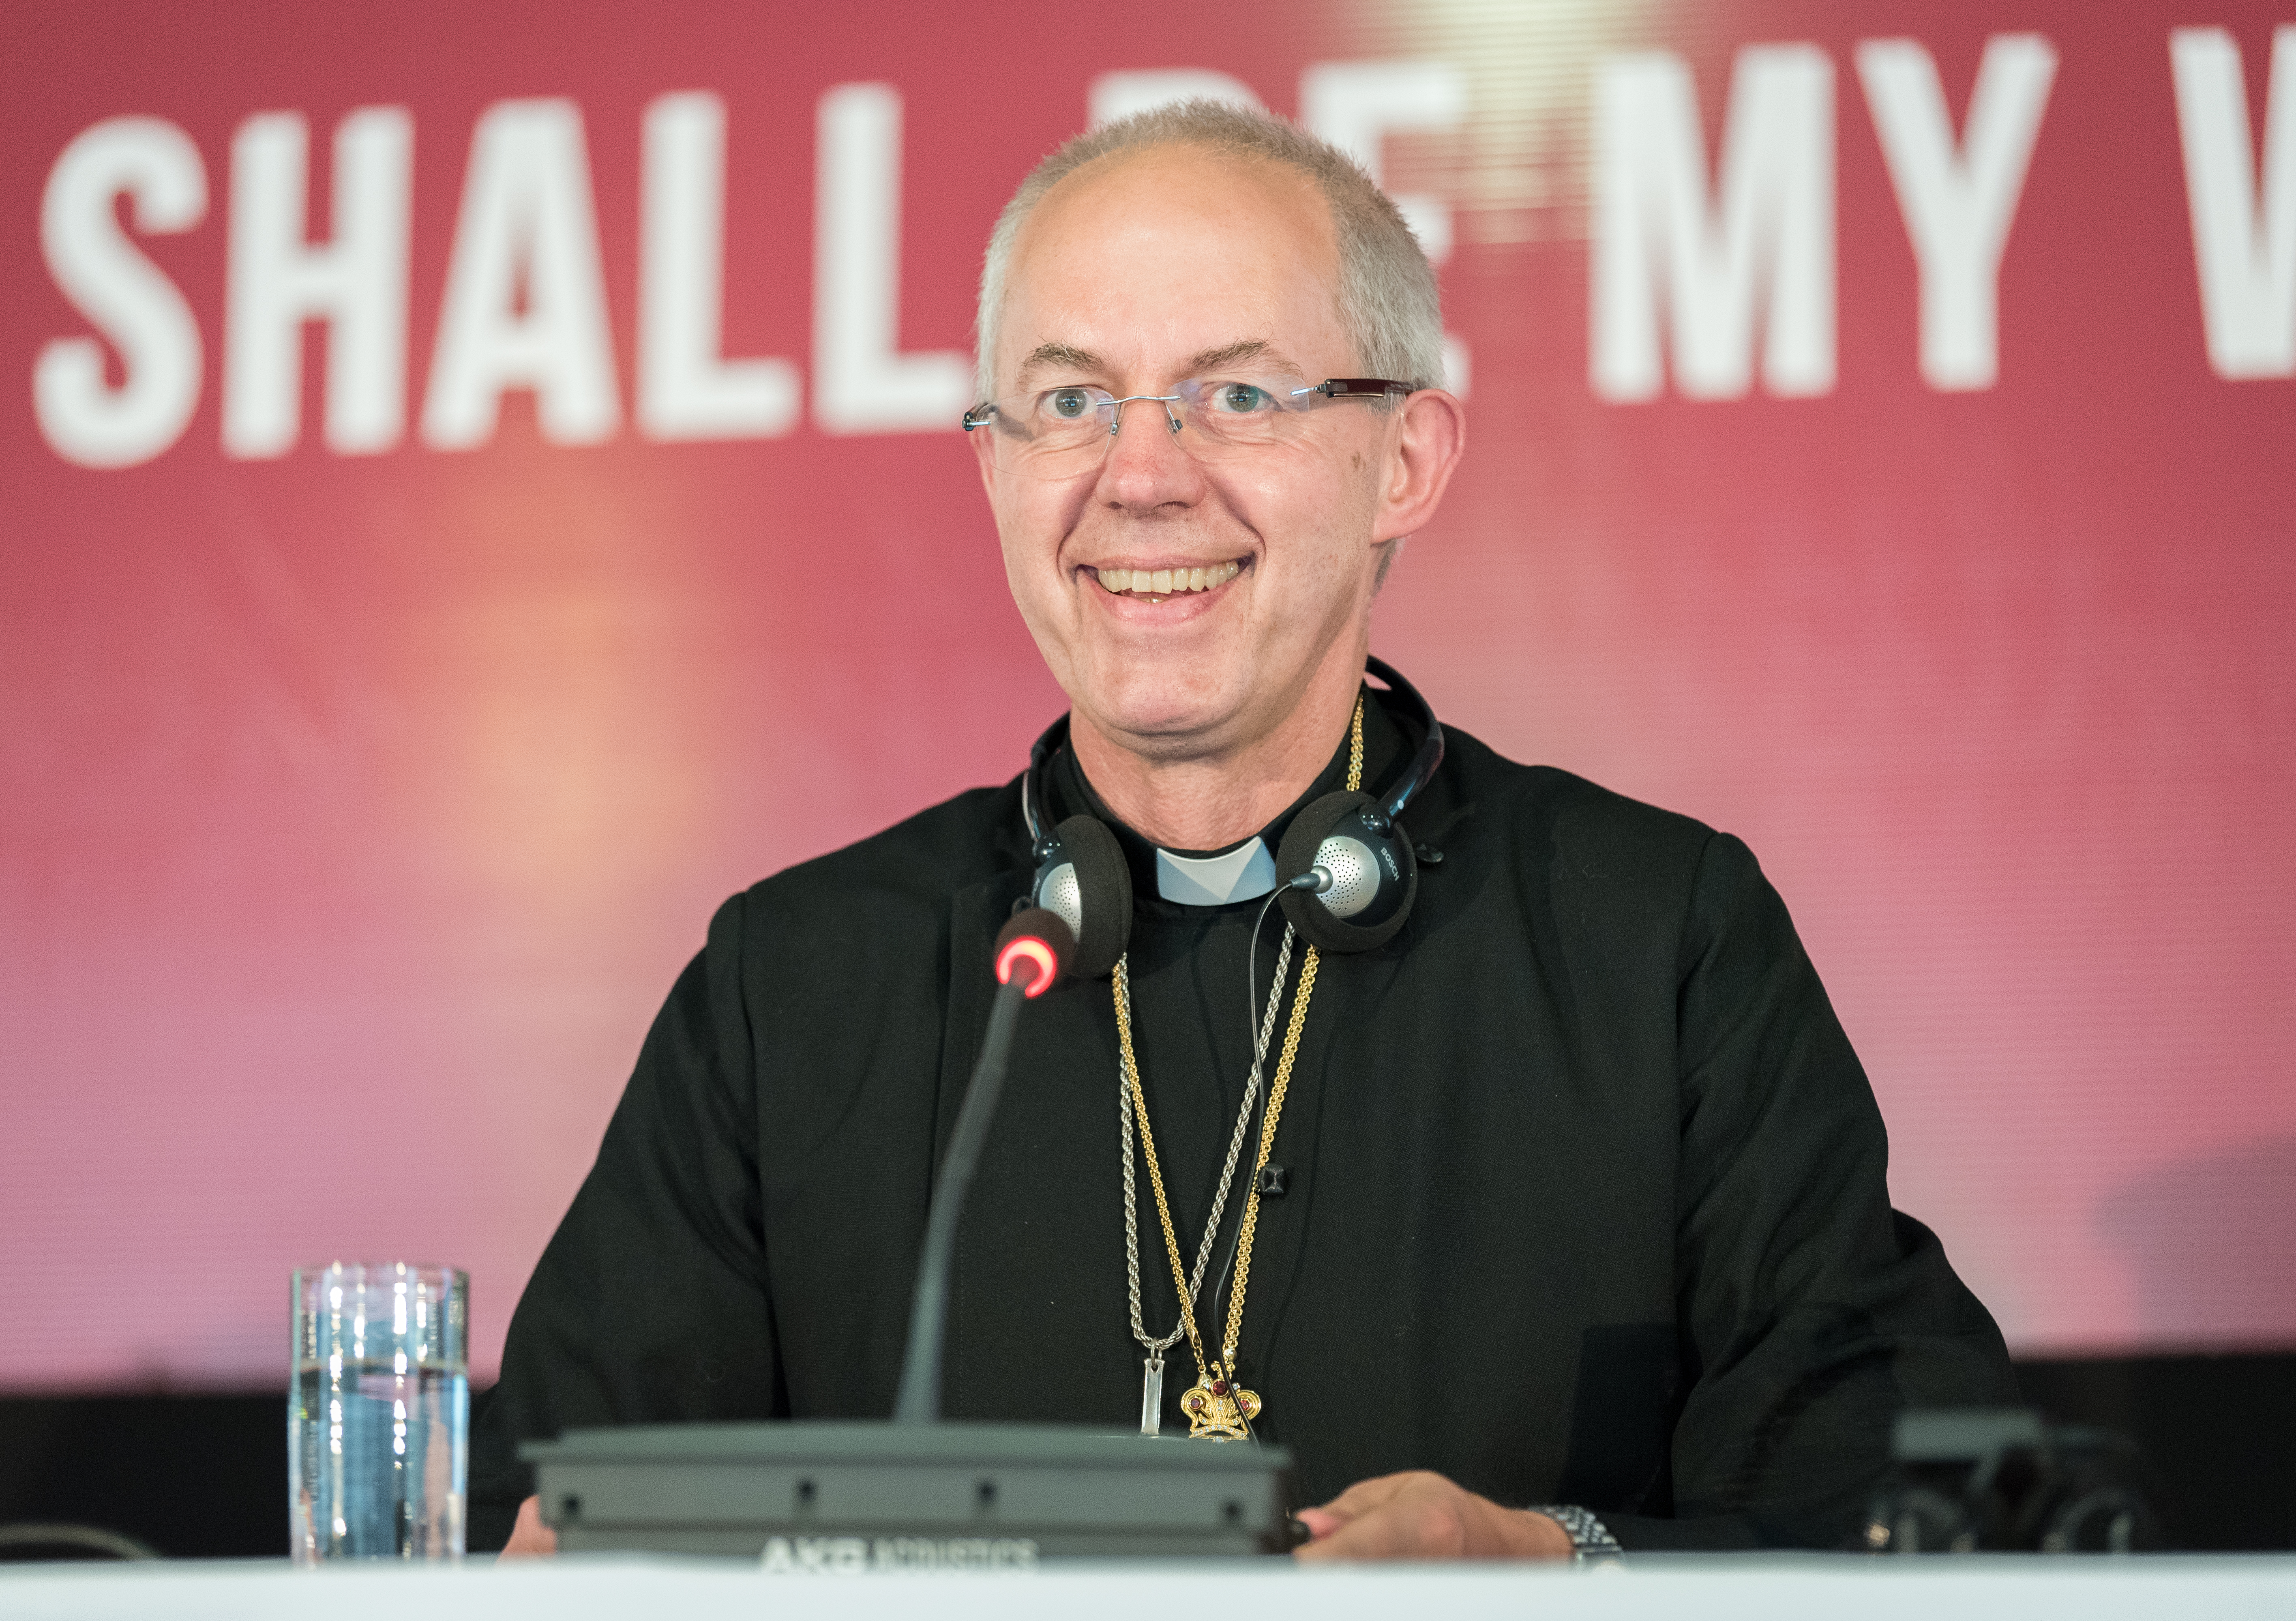 Justin Welby in Serbia